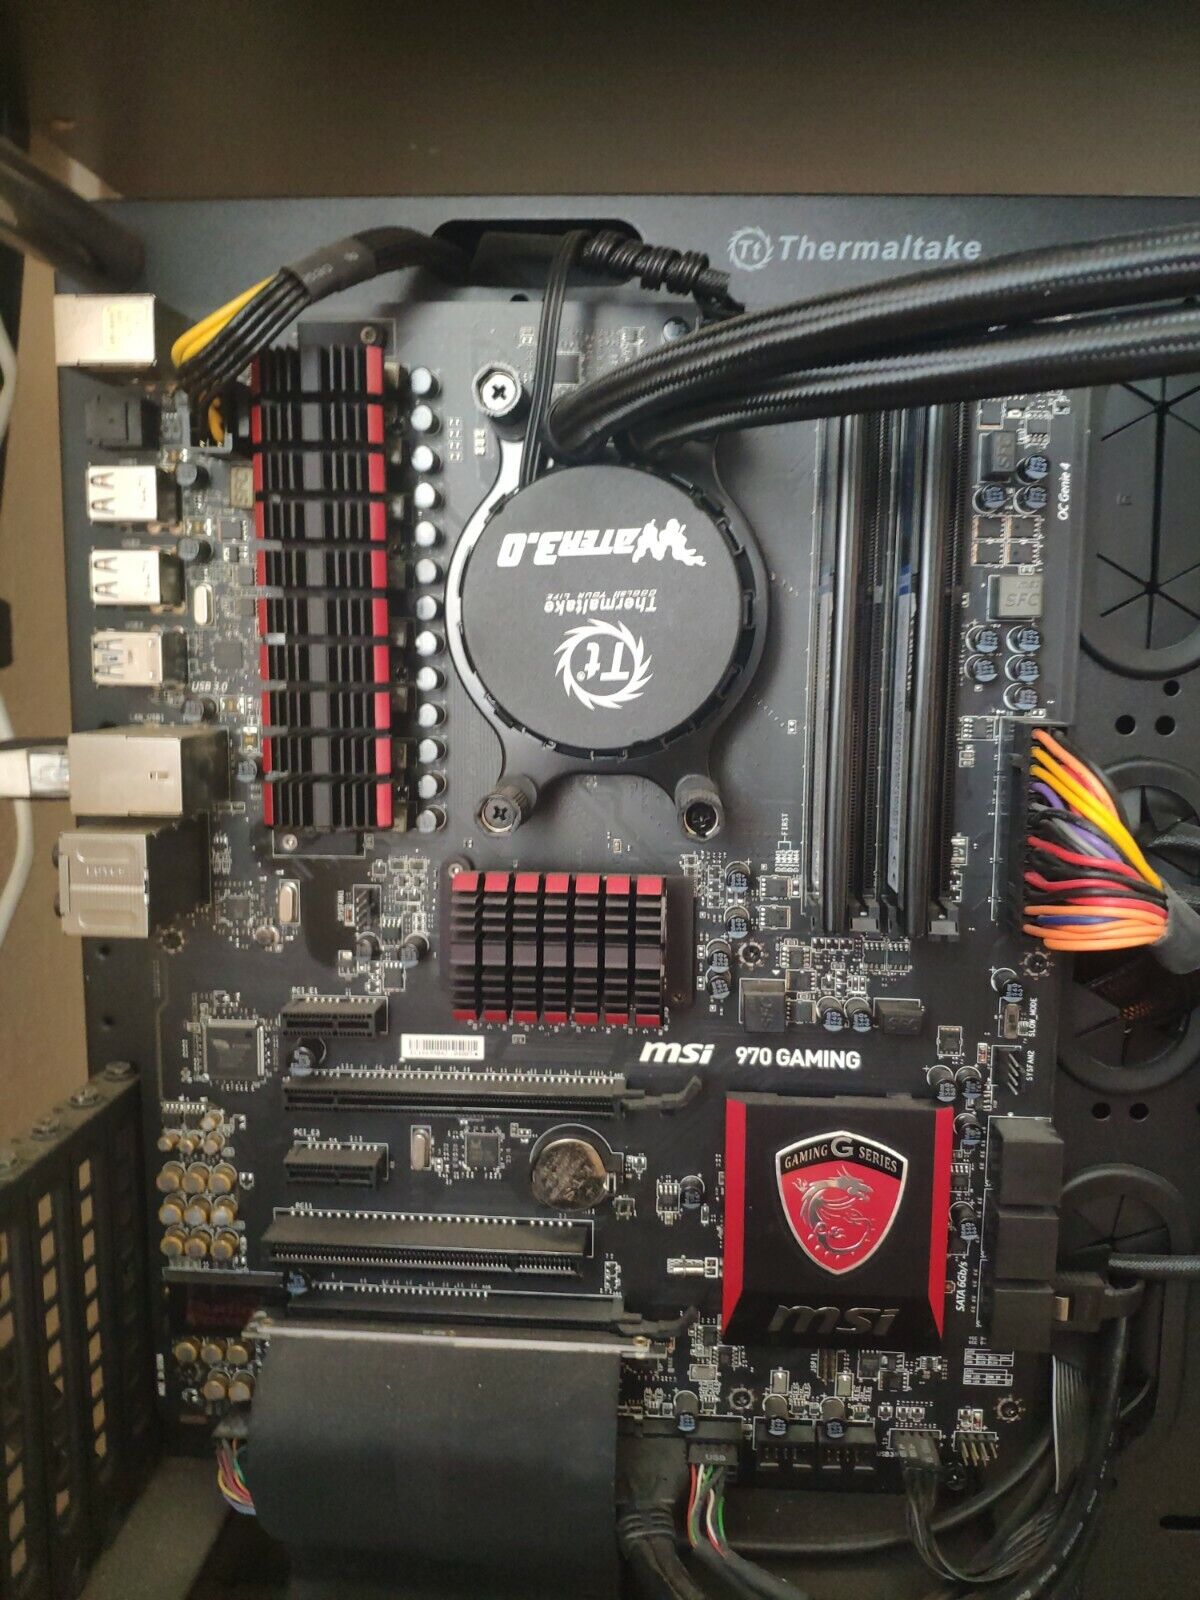 MSI 970 GAMING, AM3+, AMD Motherboard with 16 GB DDR3 RAM